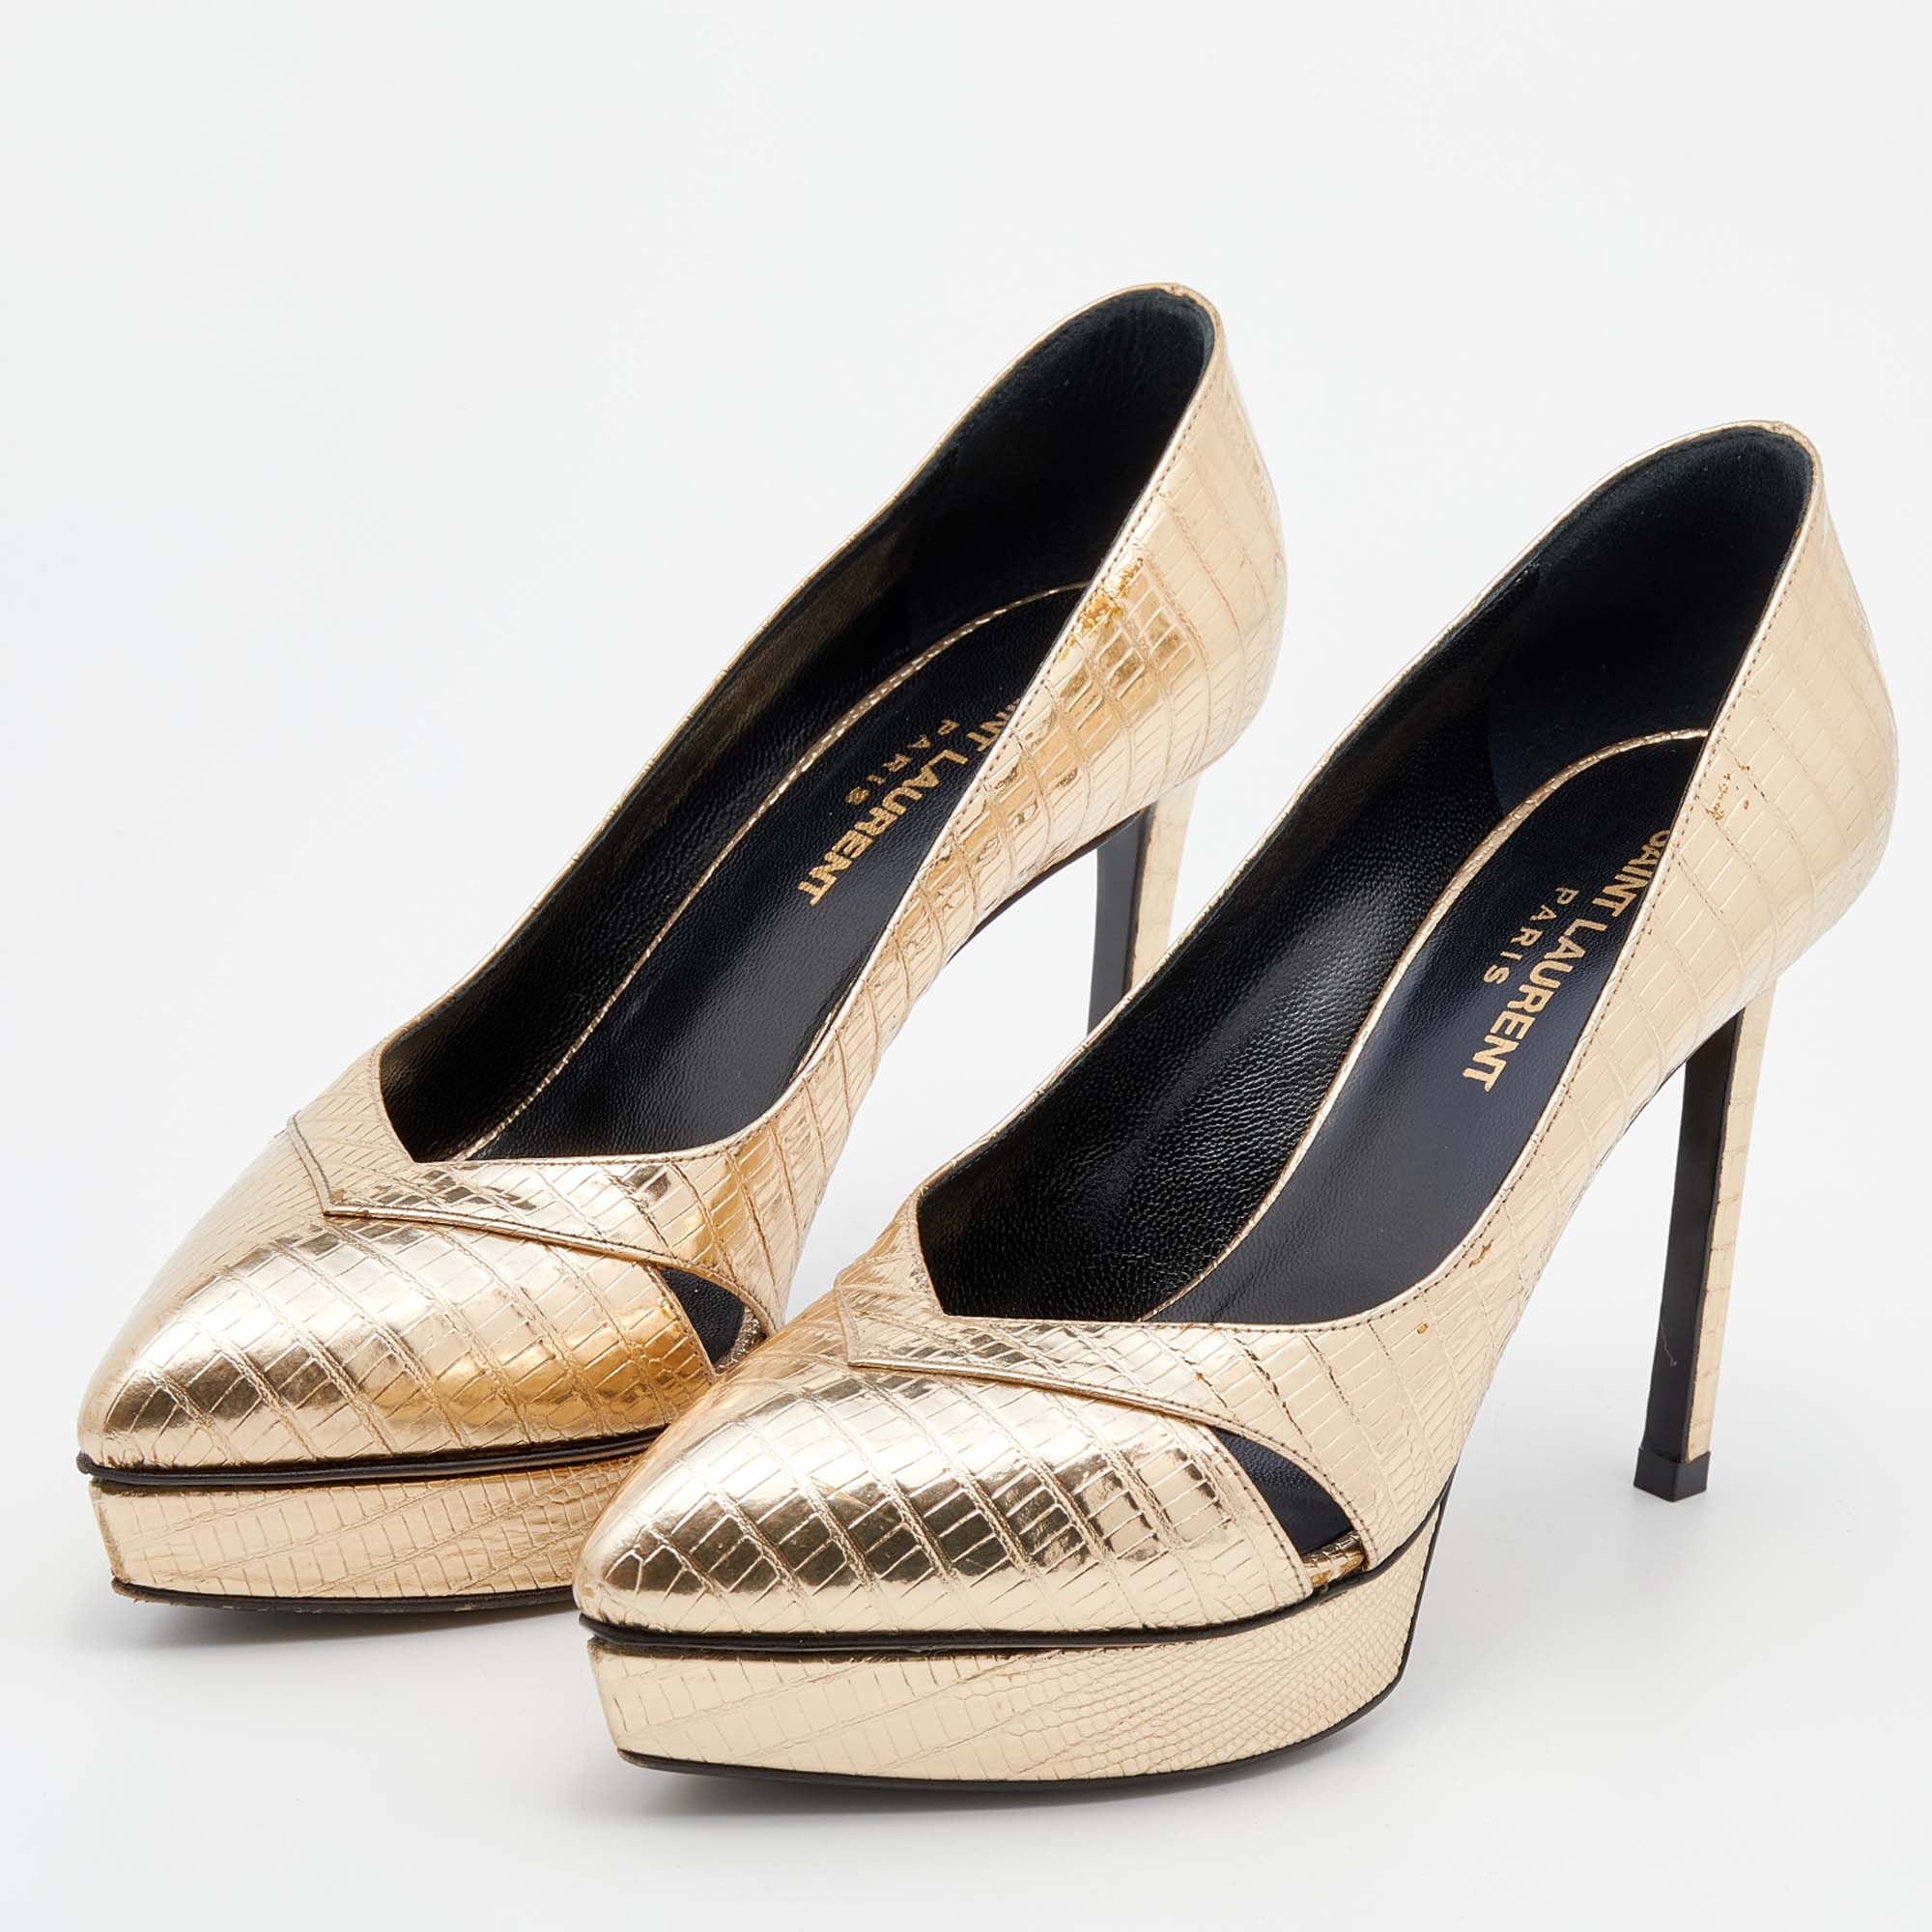 

Saint Laurent Metallic Gold Lizard Embossed Leather Pointed Toe Pumps Size